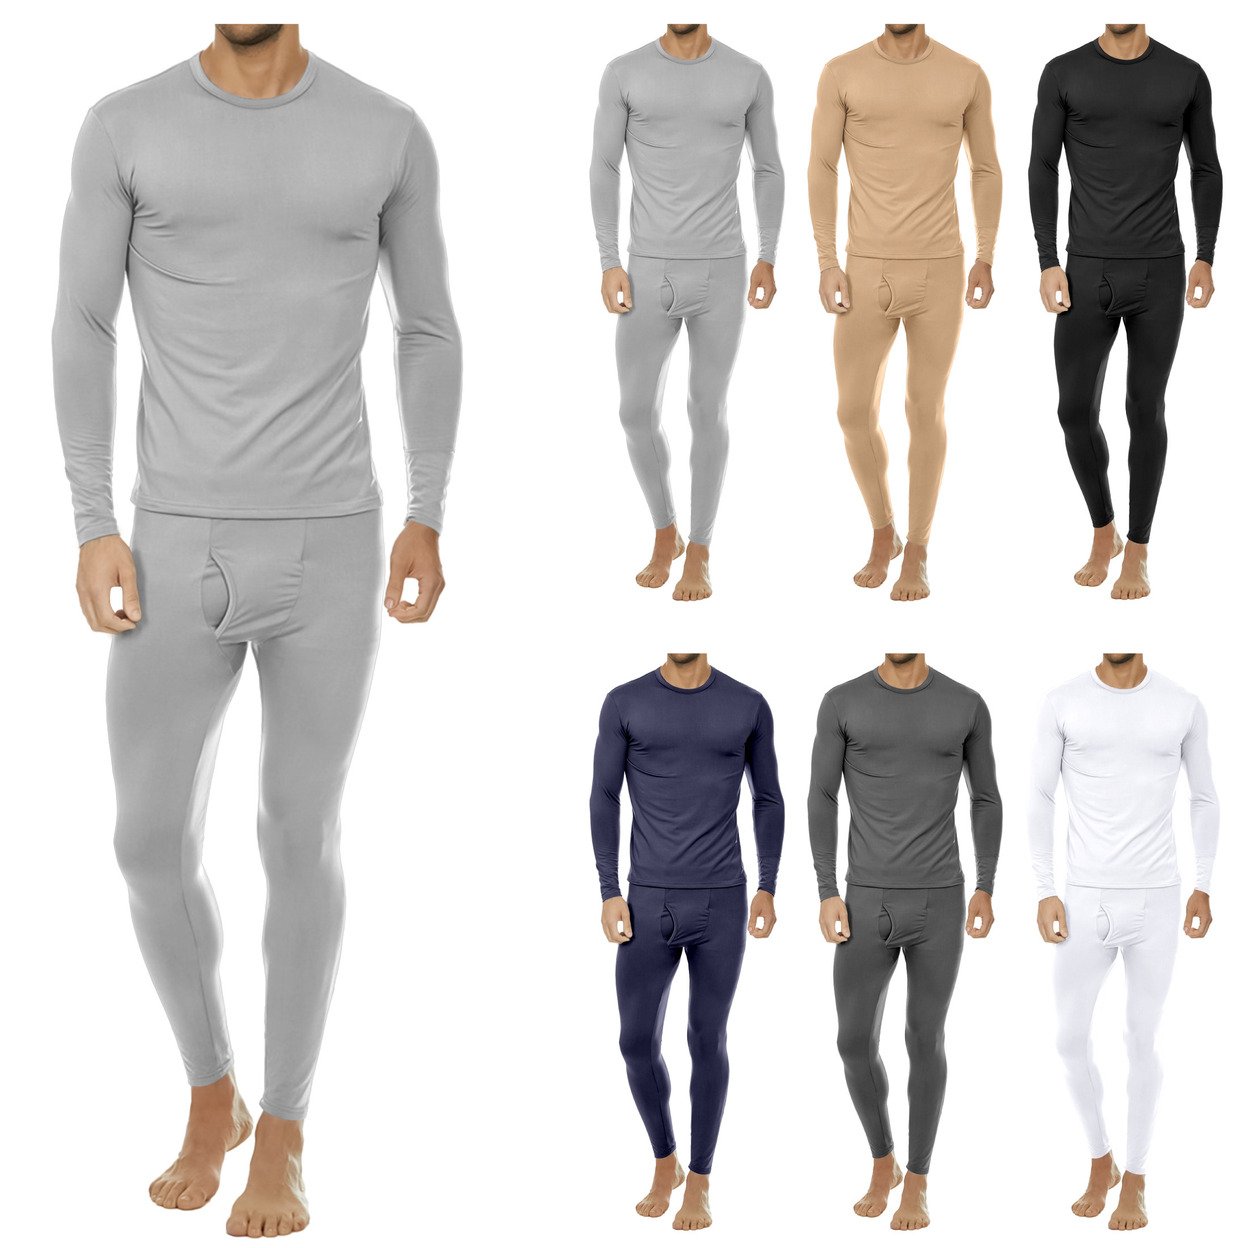 2-Sets: Men's Winter Warm Fleece Lined Thermal Underwear Set For Cold Weather - White&navy, Small